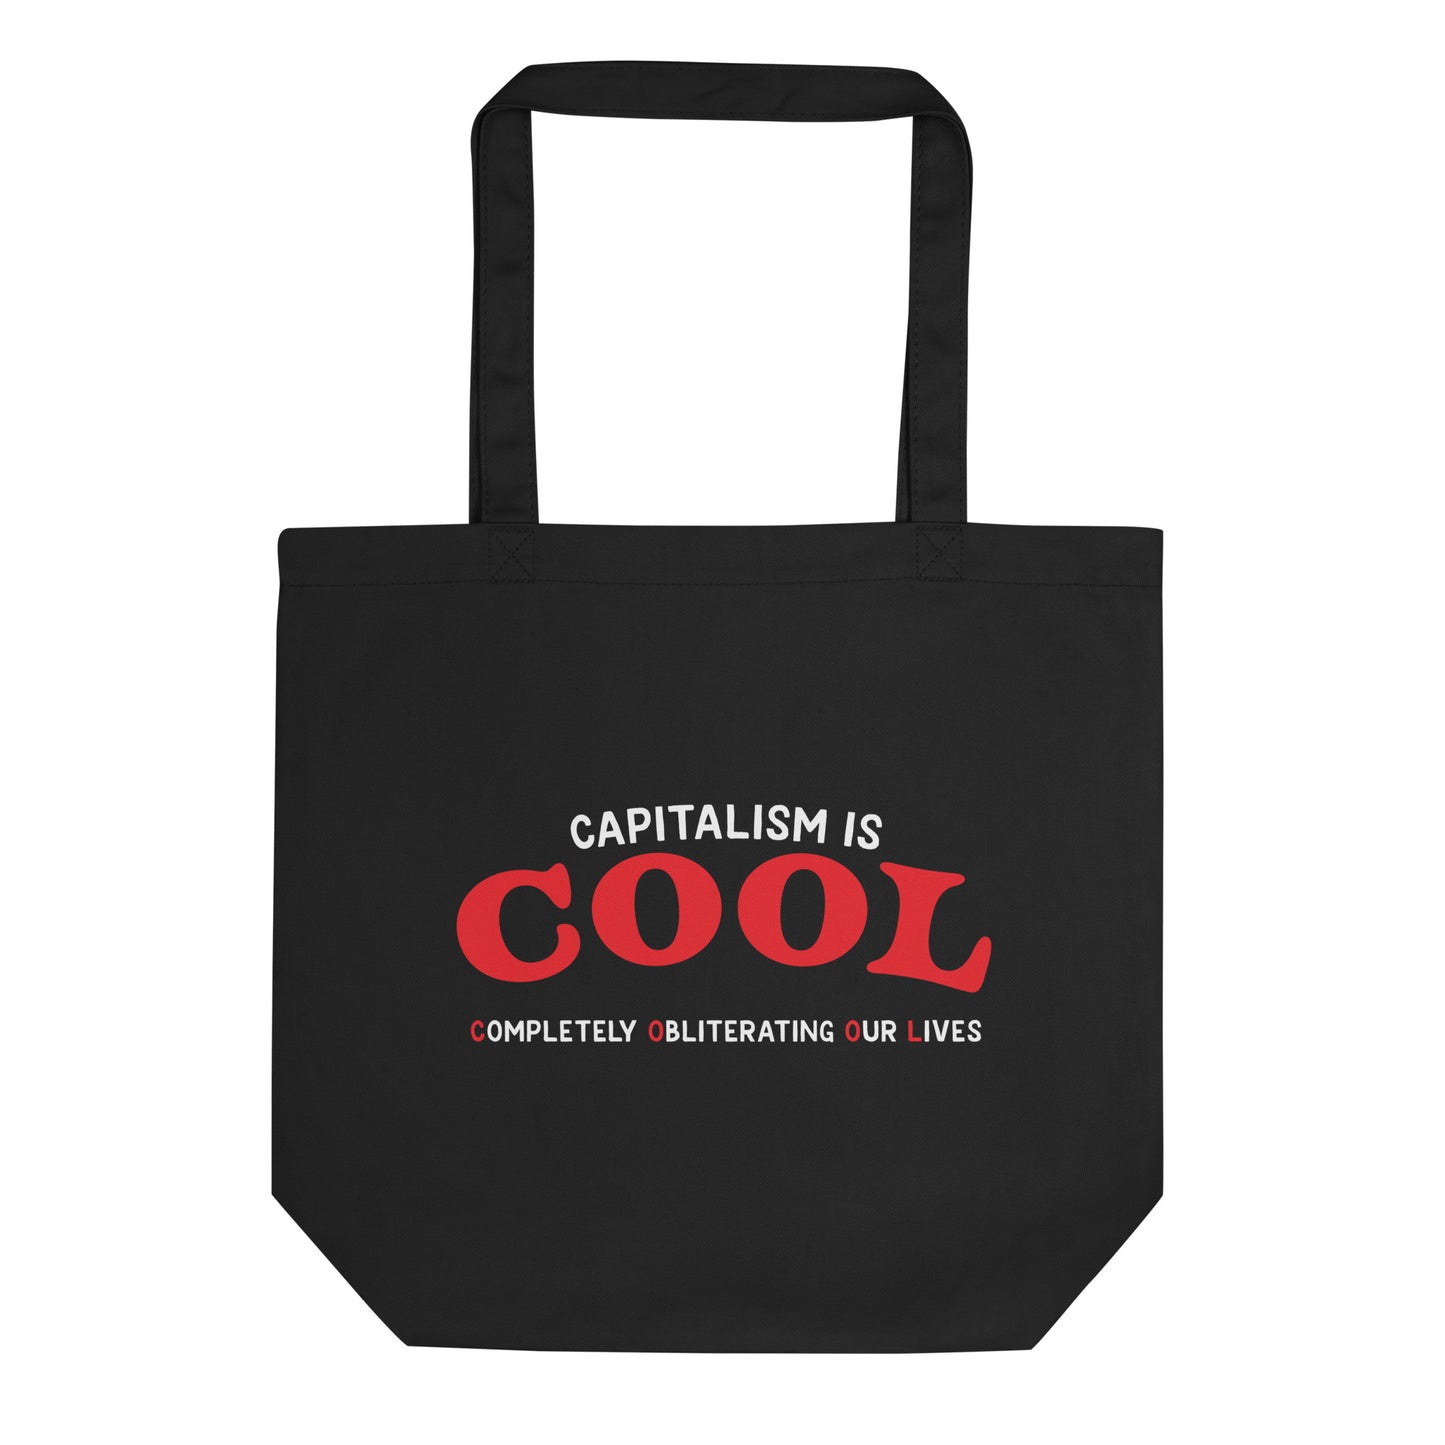 Capitalism is Cool (Completely Obliterating Our Lives) Tote Bag